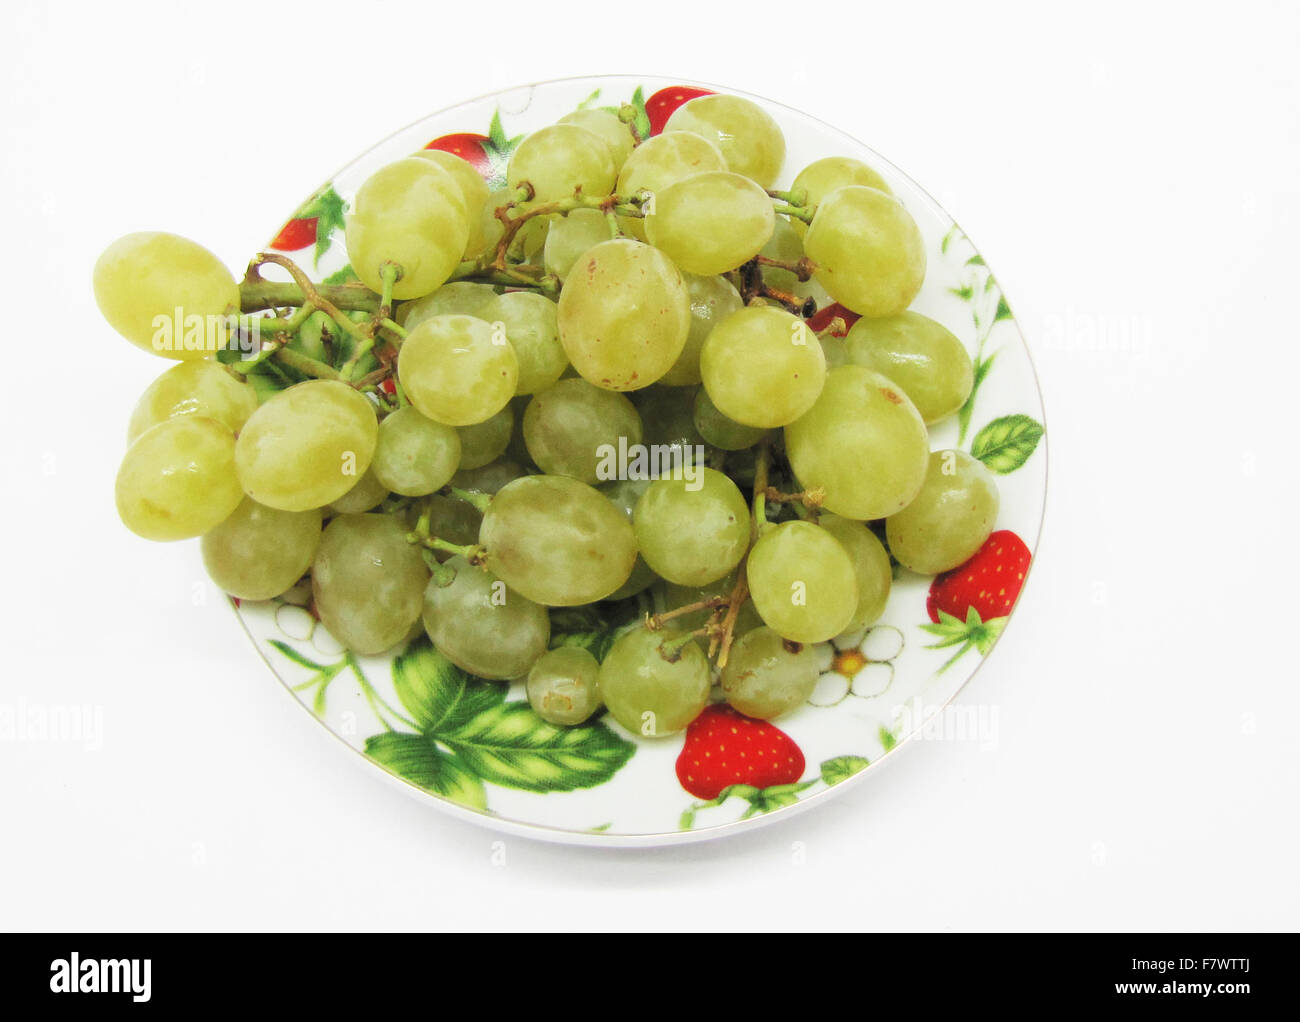 Grape on plate is insulated on light background Stock Photo